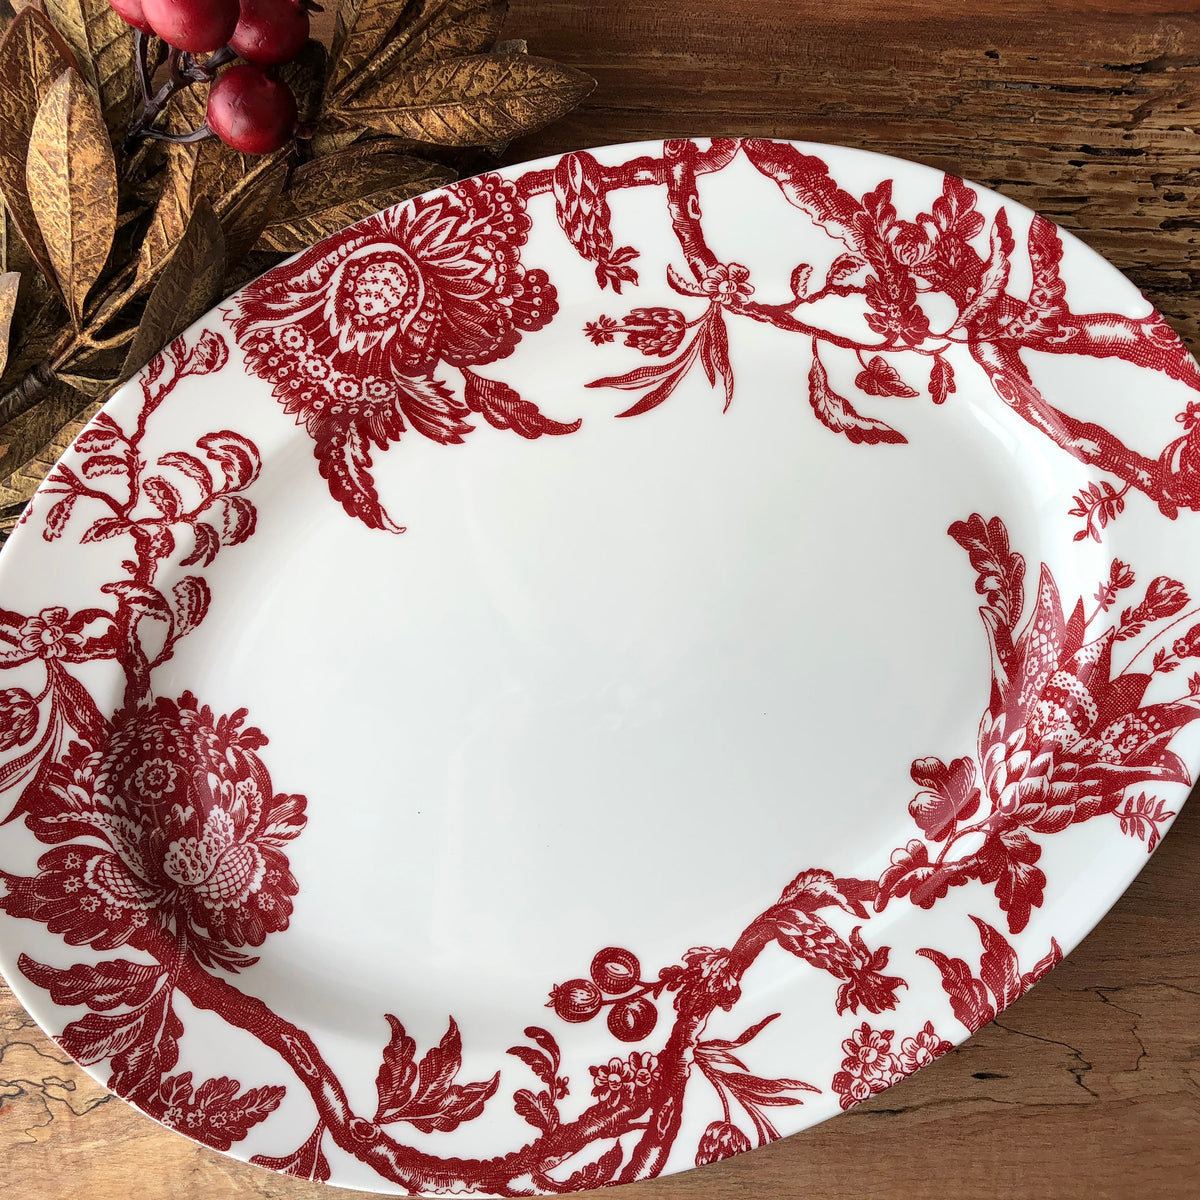 The Arcadia Crimson Large Oval Platter by Caskata is a timeless porcelain piece of heirloom quality.